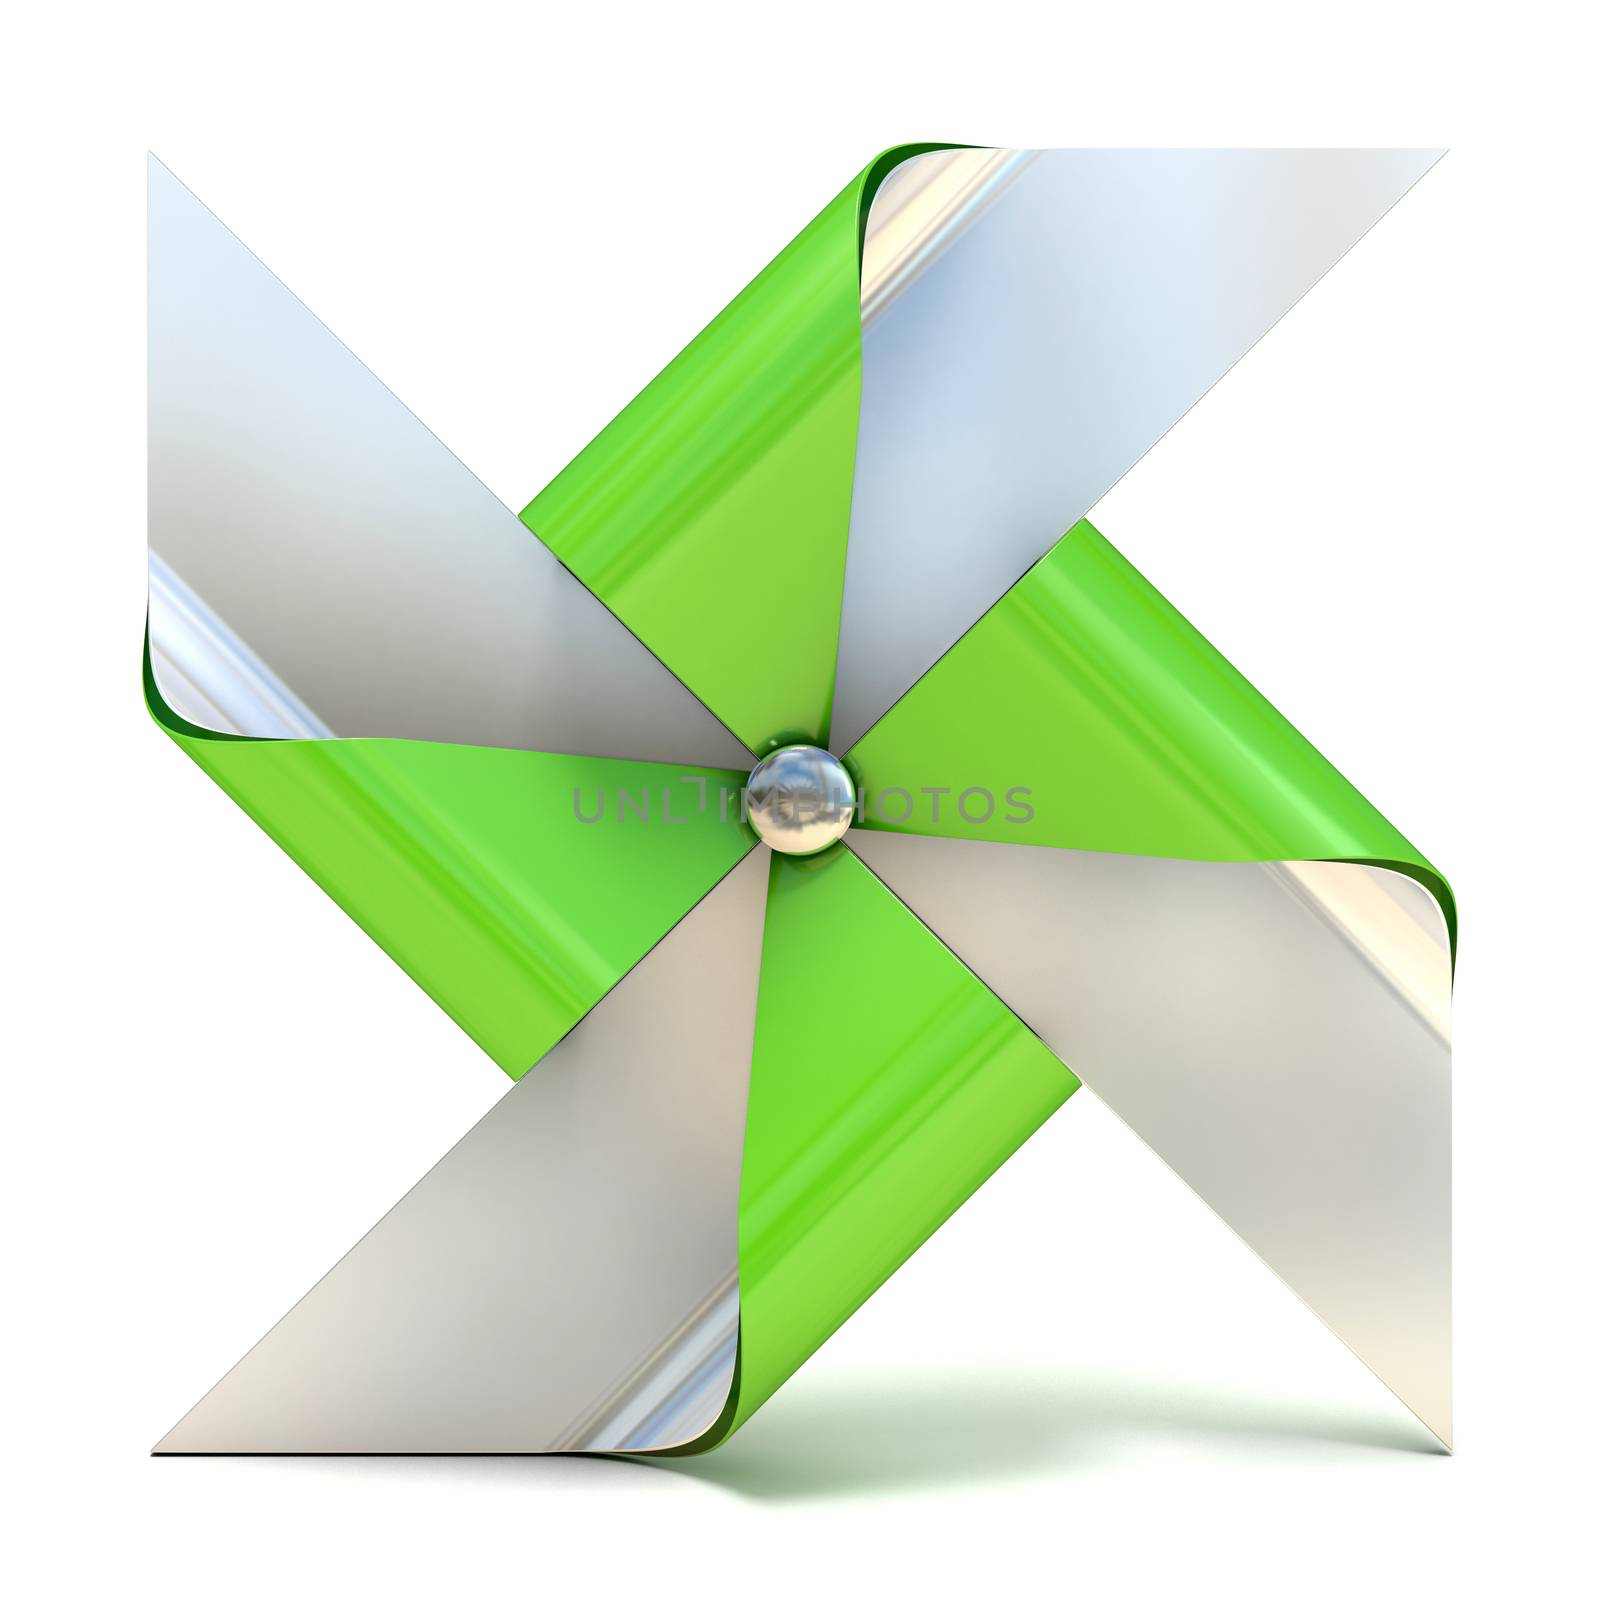 Pinwheel toy, four sided. 3D by djmilic